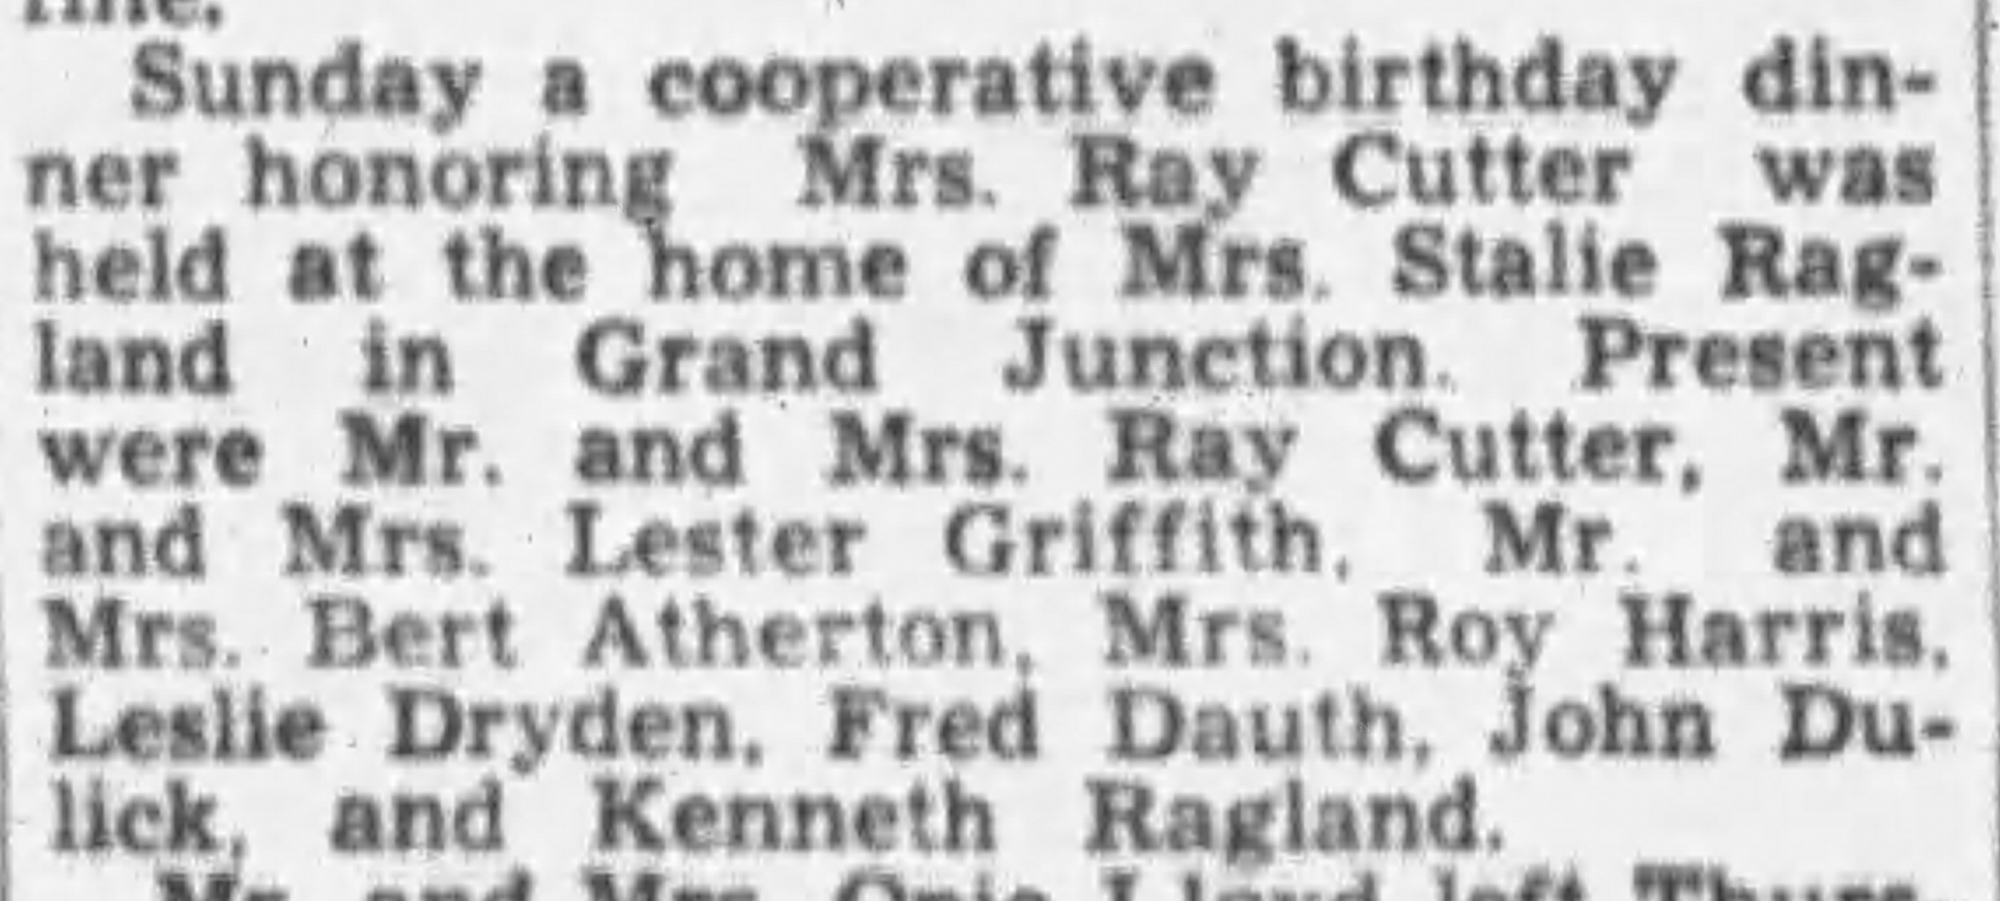 Dauth Family Archive - 1948-04-18 - The Daily Sentinel - Fred Dauth Visiting Ray Cutter Family